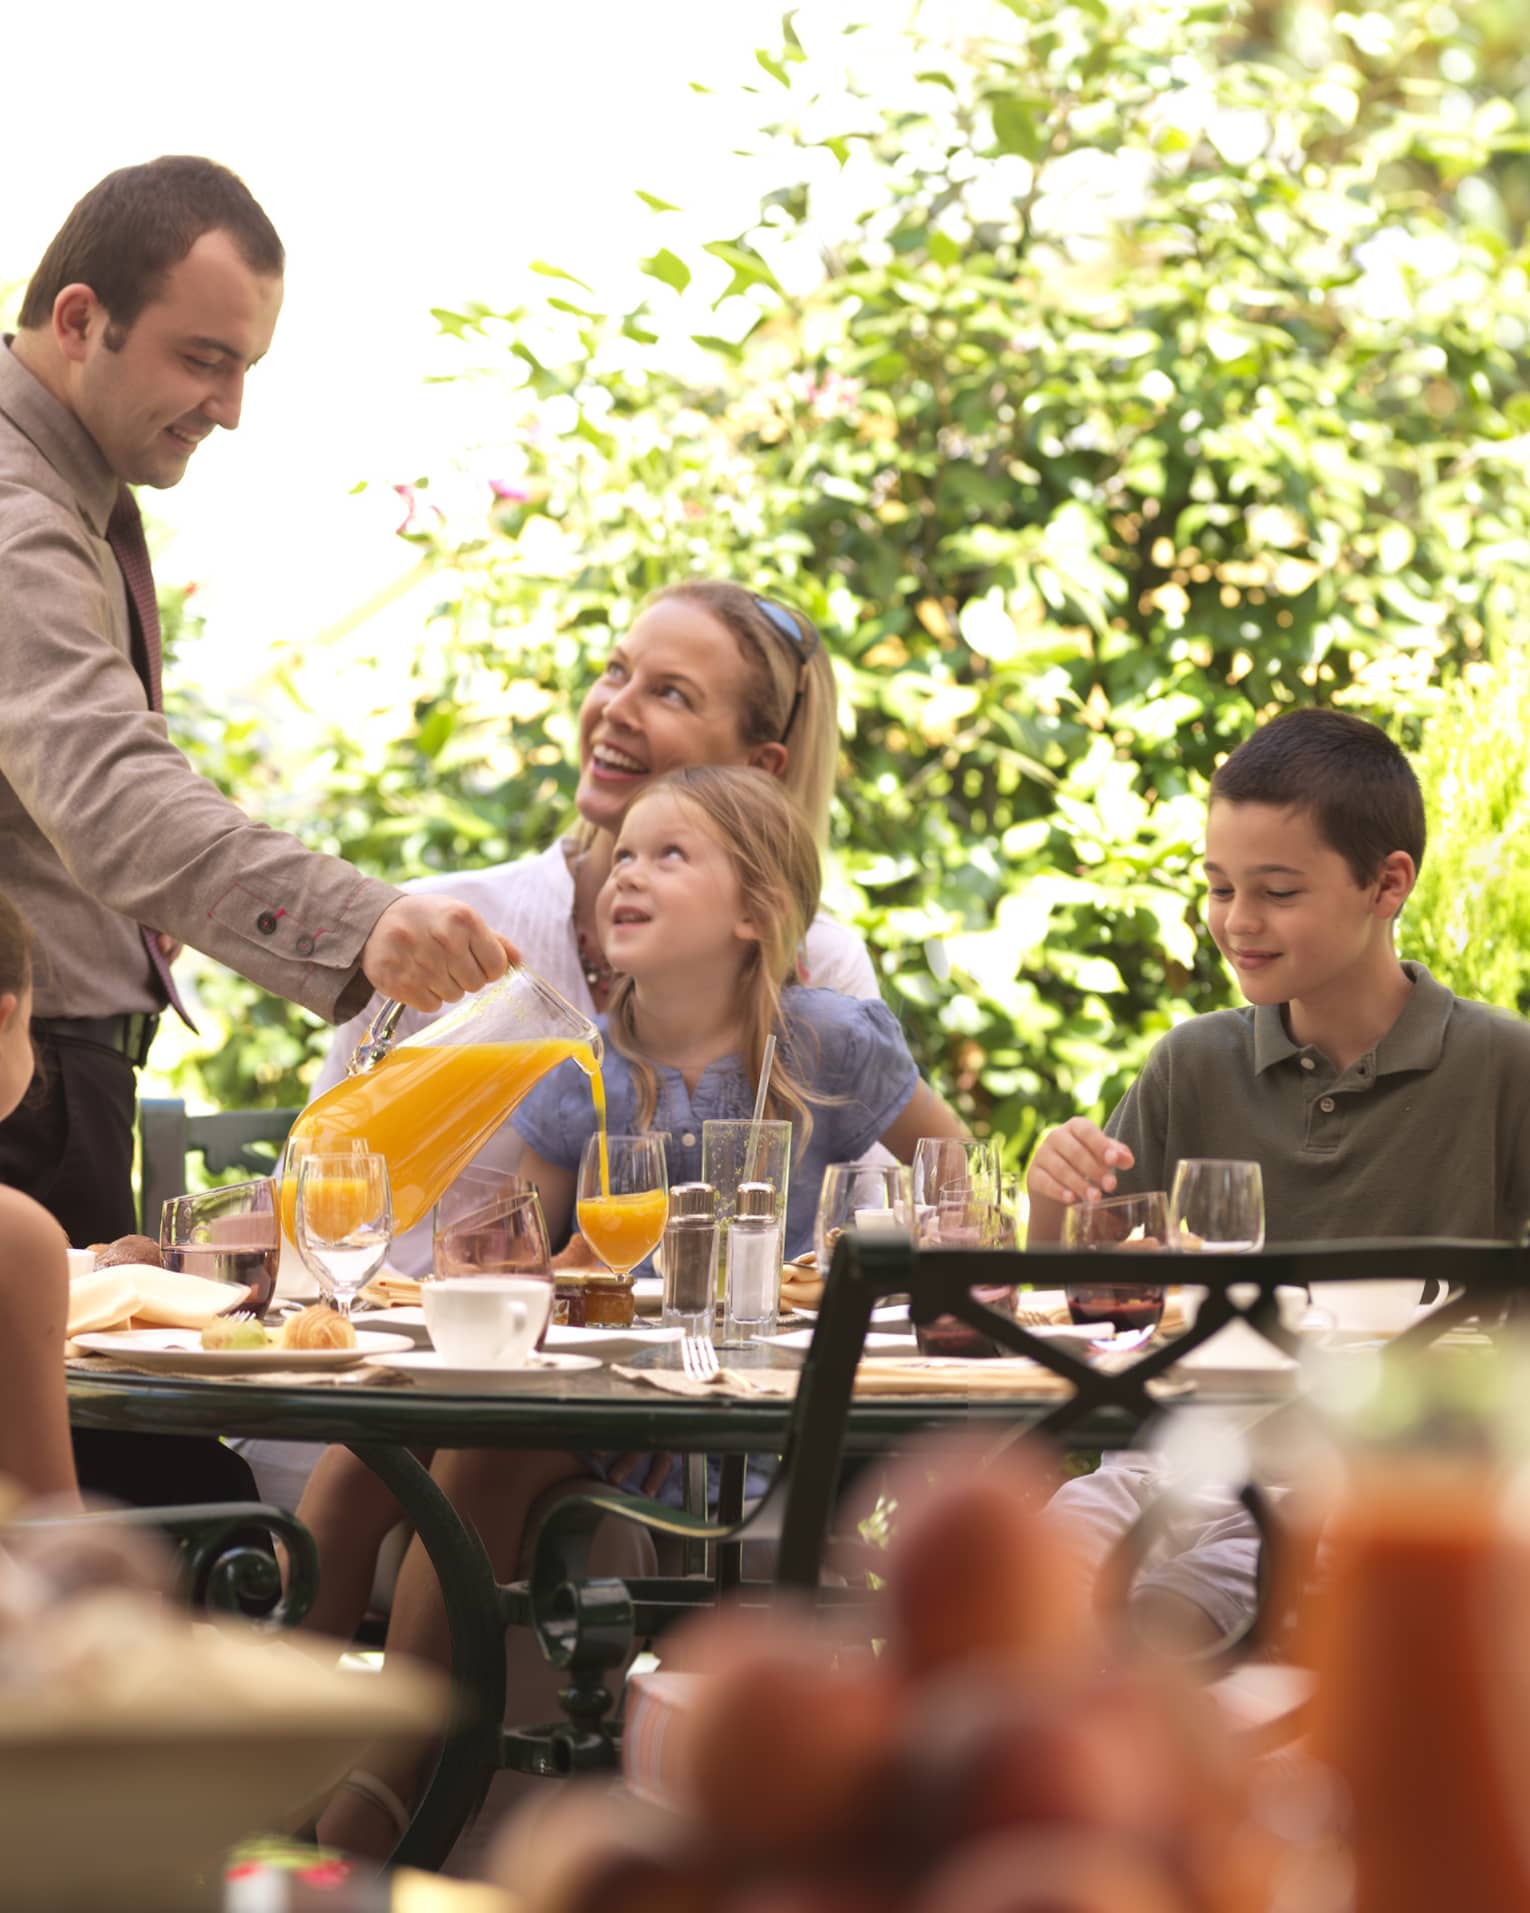 Family brunch on outdoor patio table, staff pours orange juice for young girl 